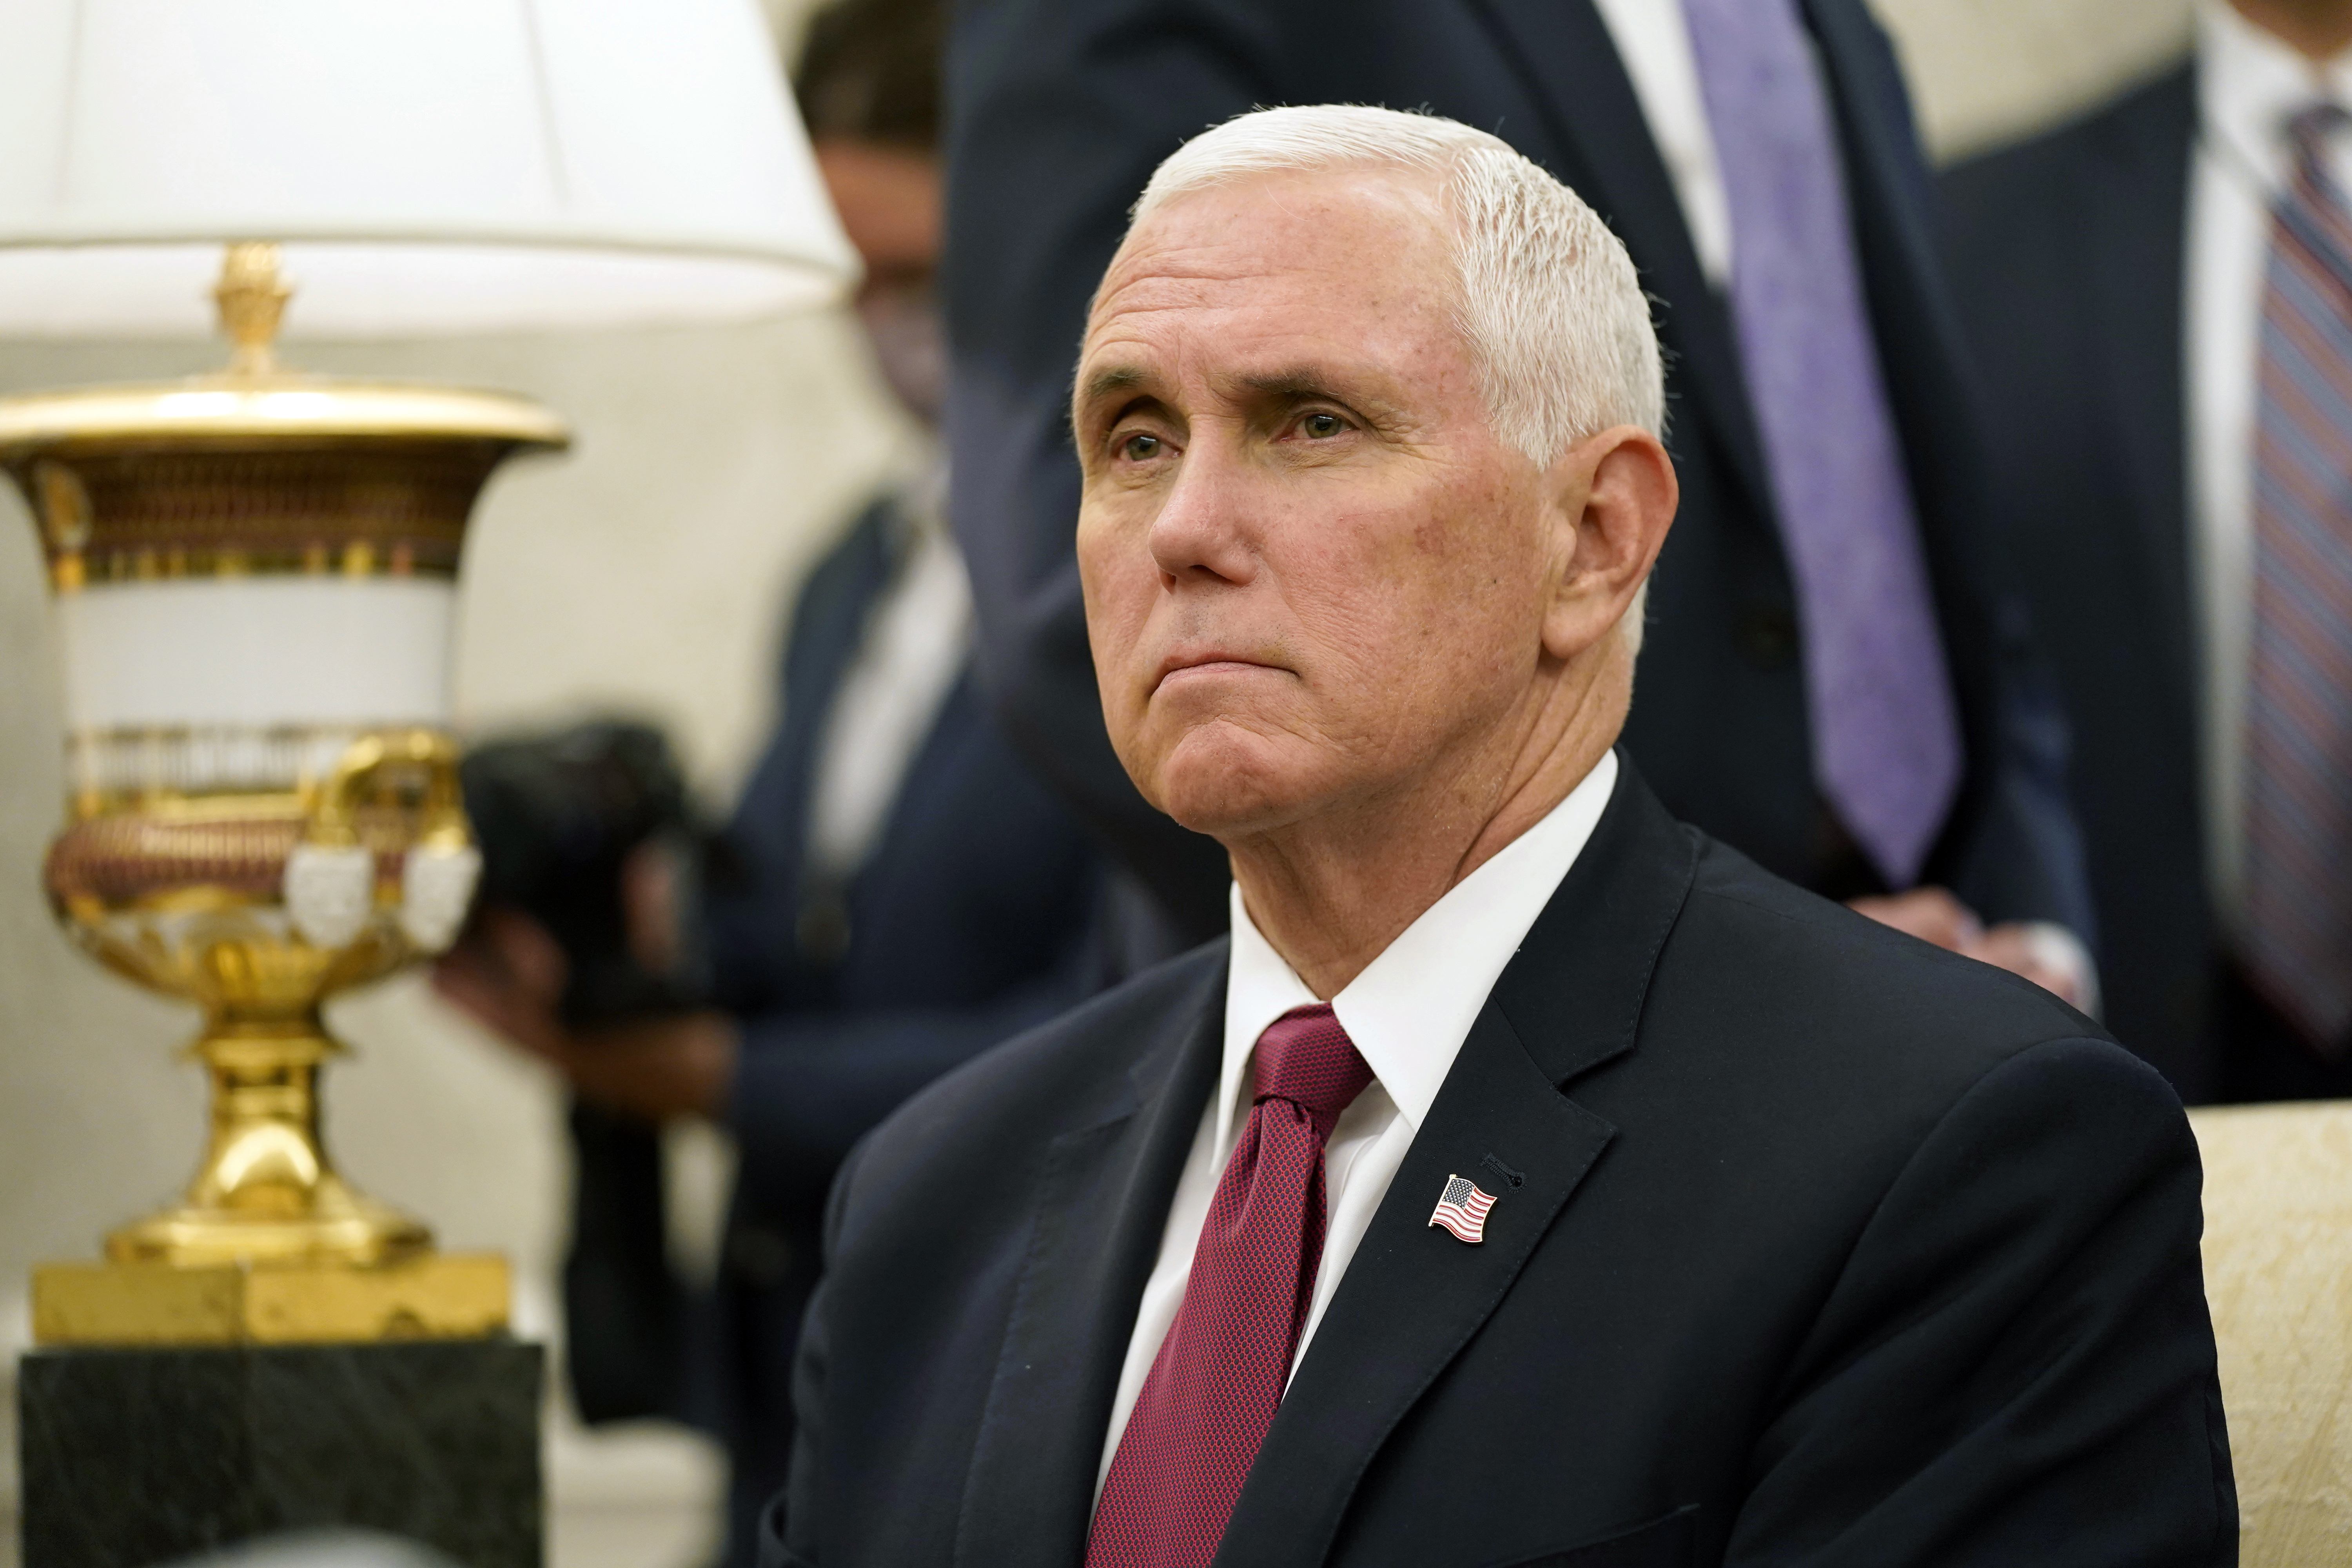 After Trump Praise, Pence Decries QAnon ‘Conspiracy Theory'